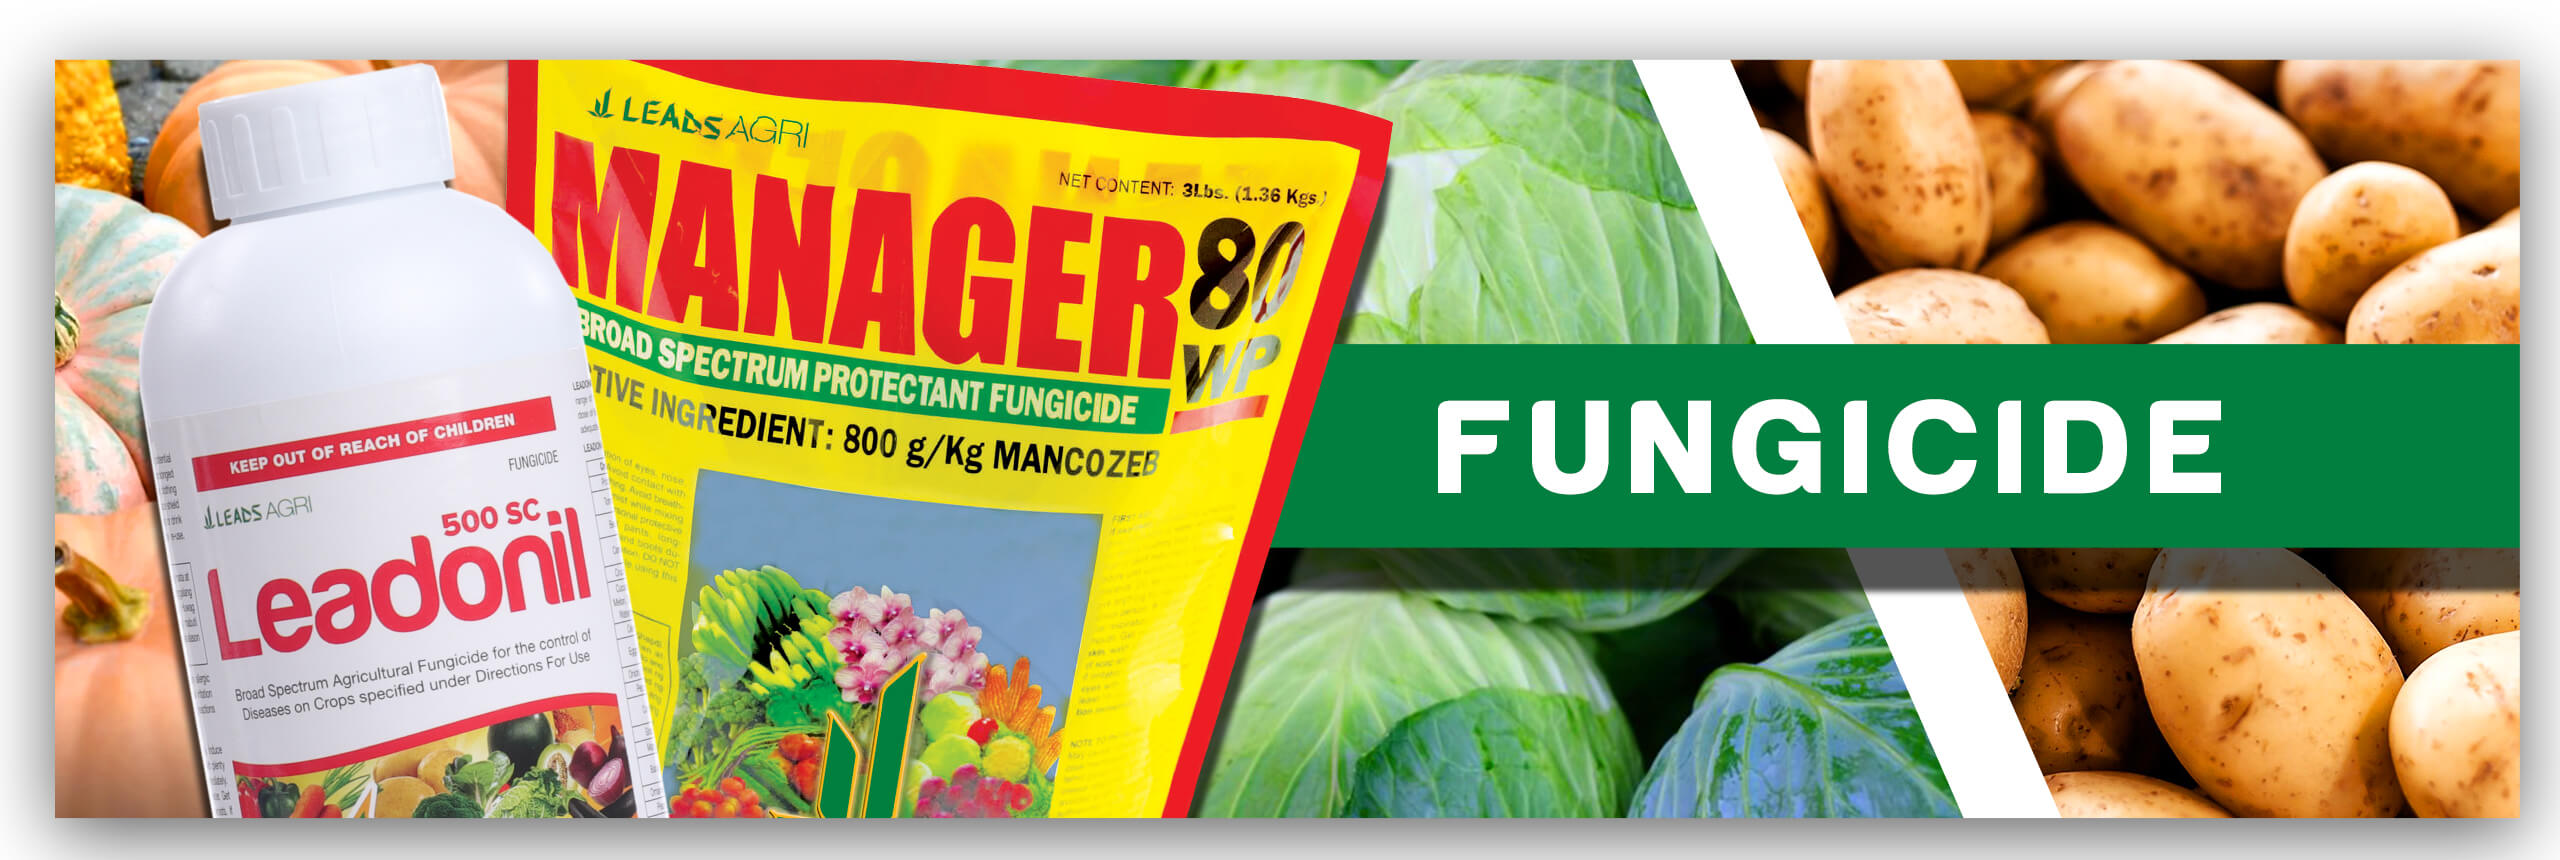 Vegetable_FUNGICIDE